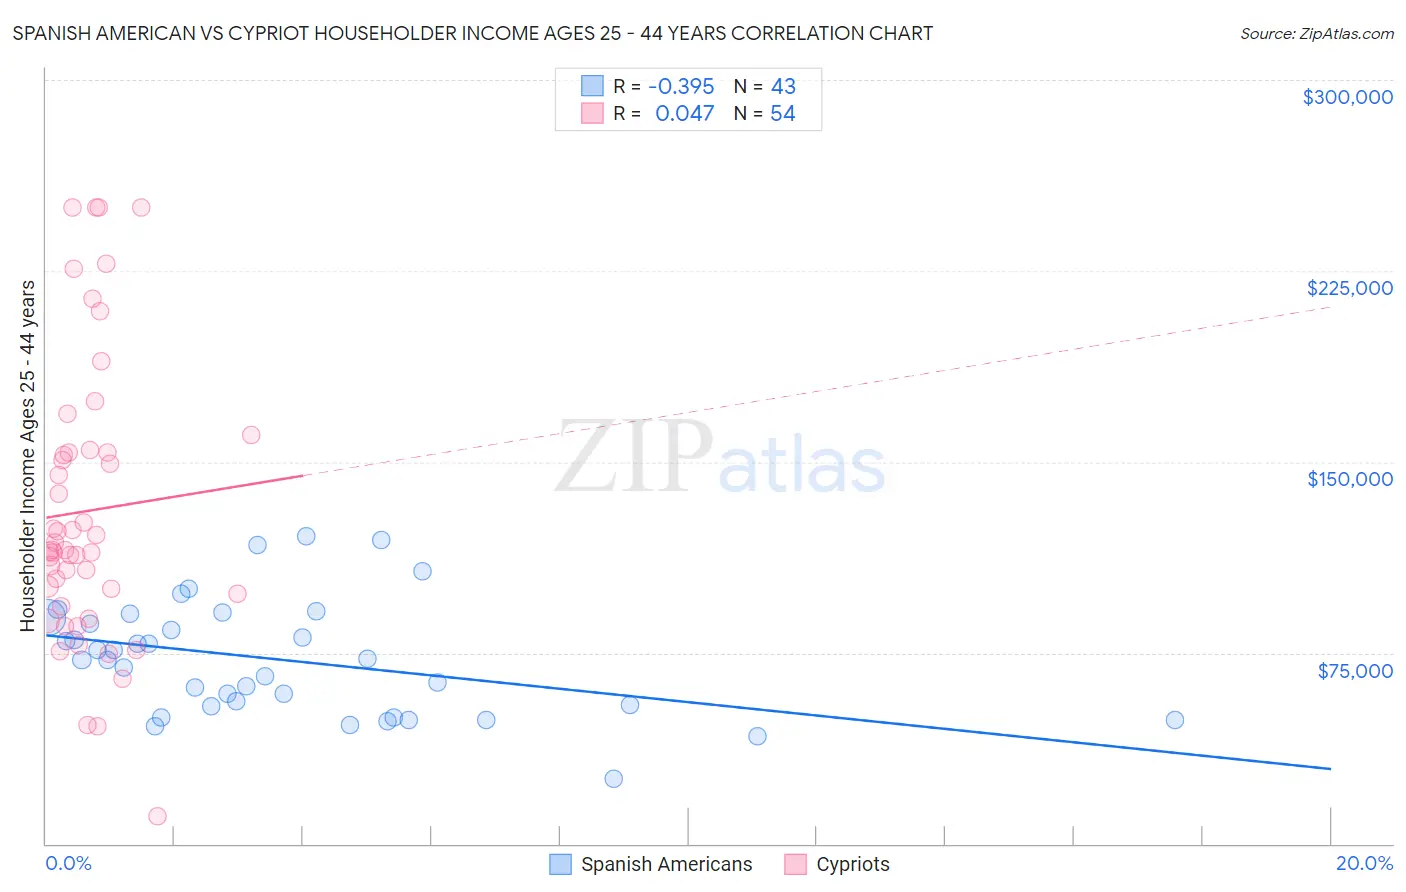 Spanish American vs Cypriot Householder Income Ages 25 - 44 years